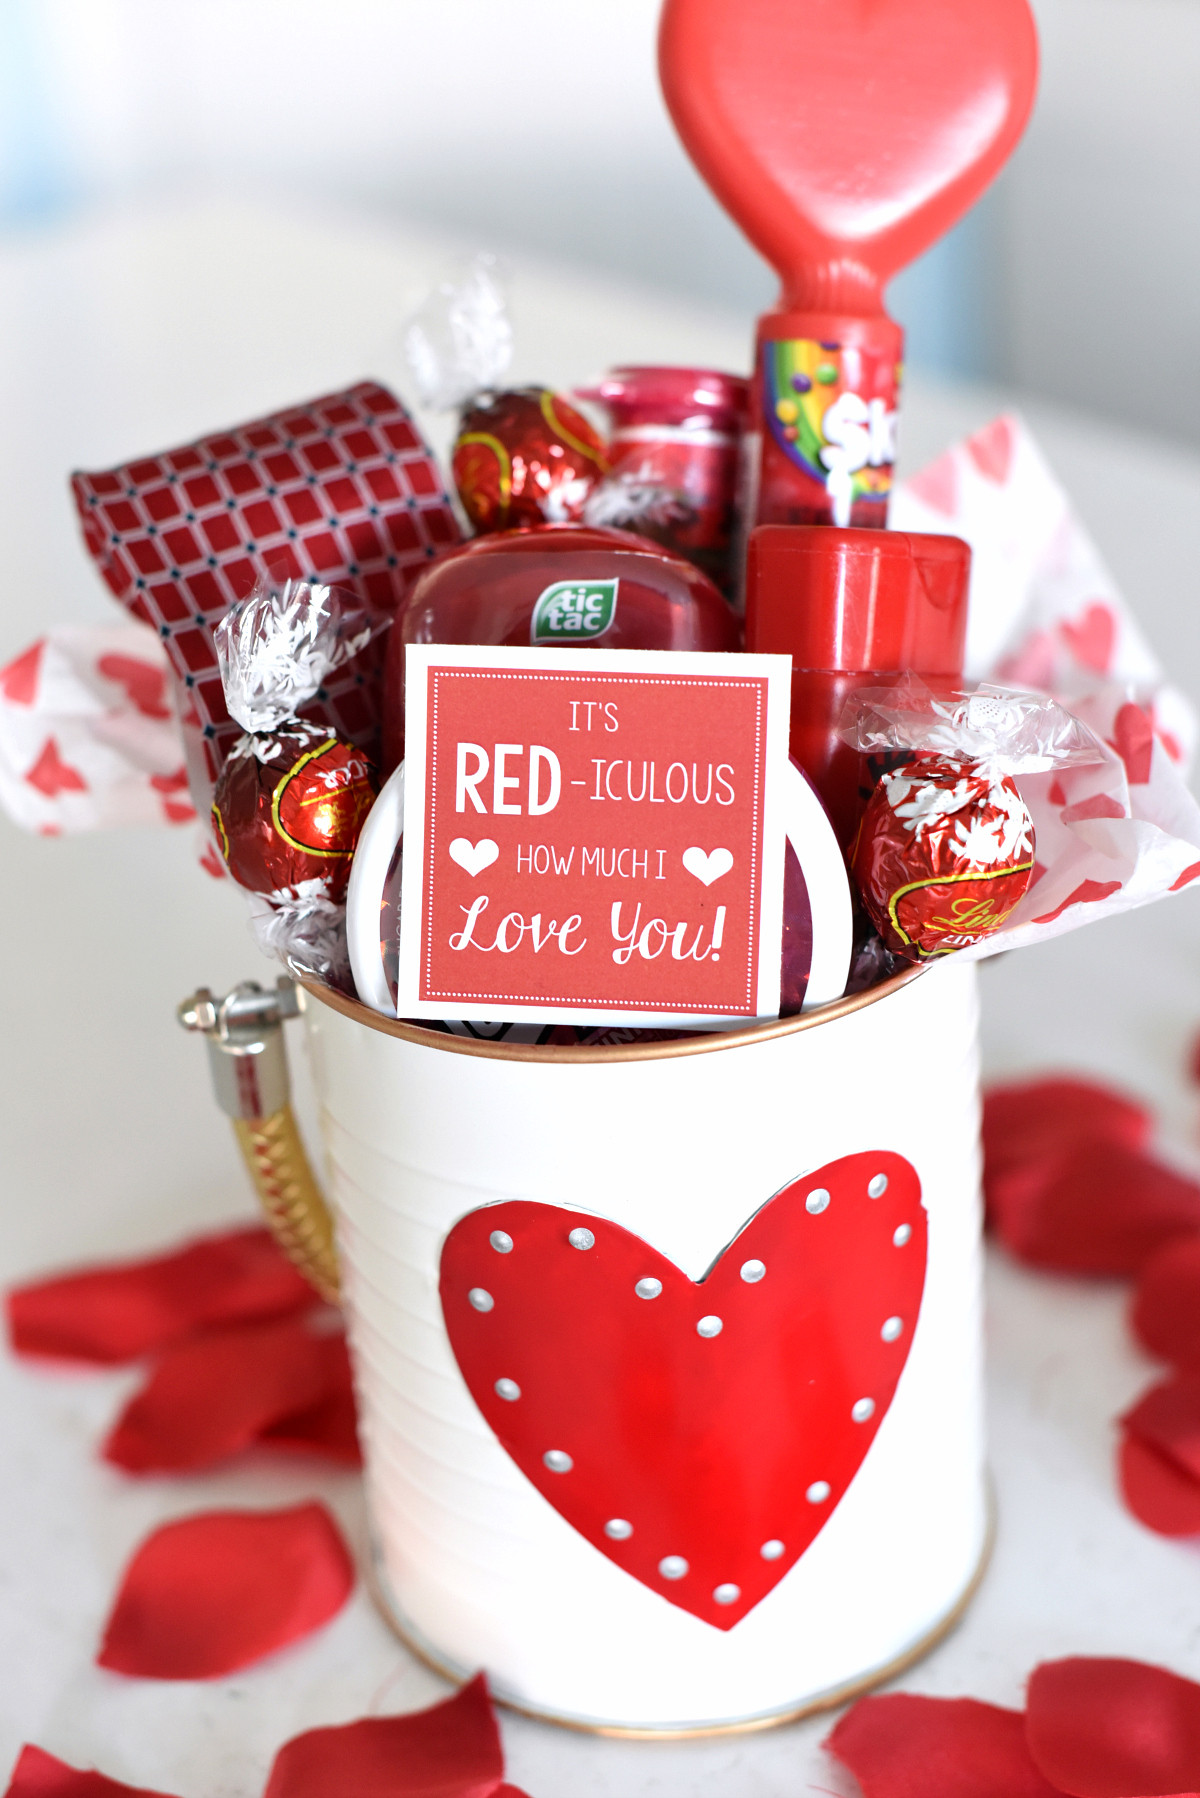 Valentines Gift Baskets For Him Ideas
 Cute Valentine s Day Gift Idea RED iculous Basket